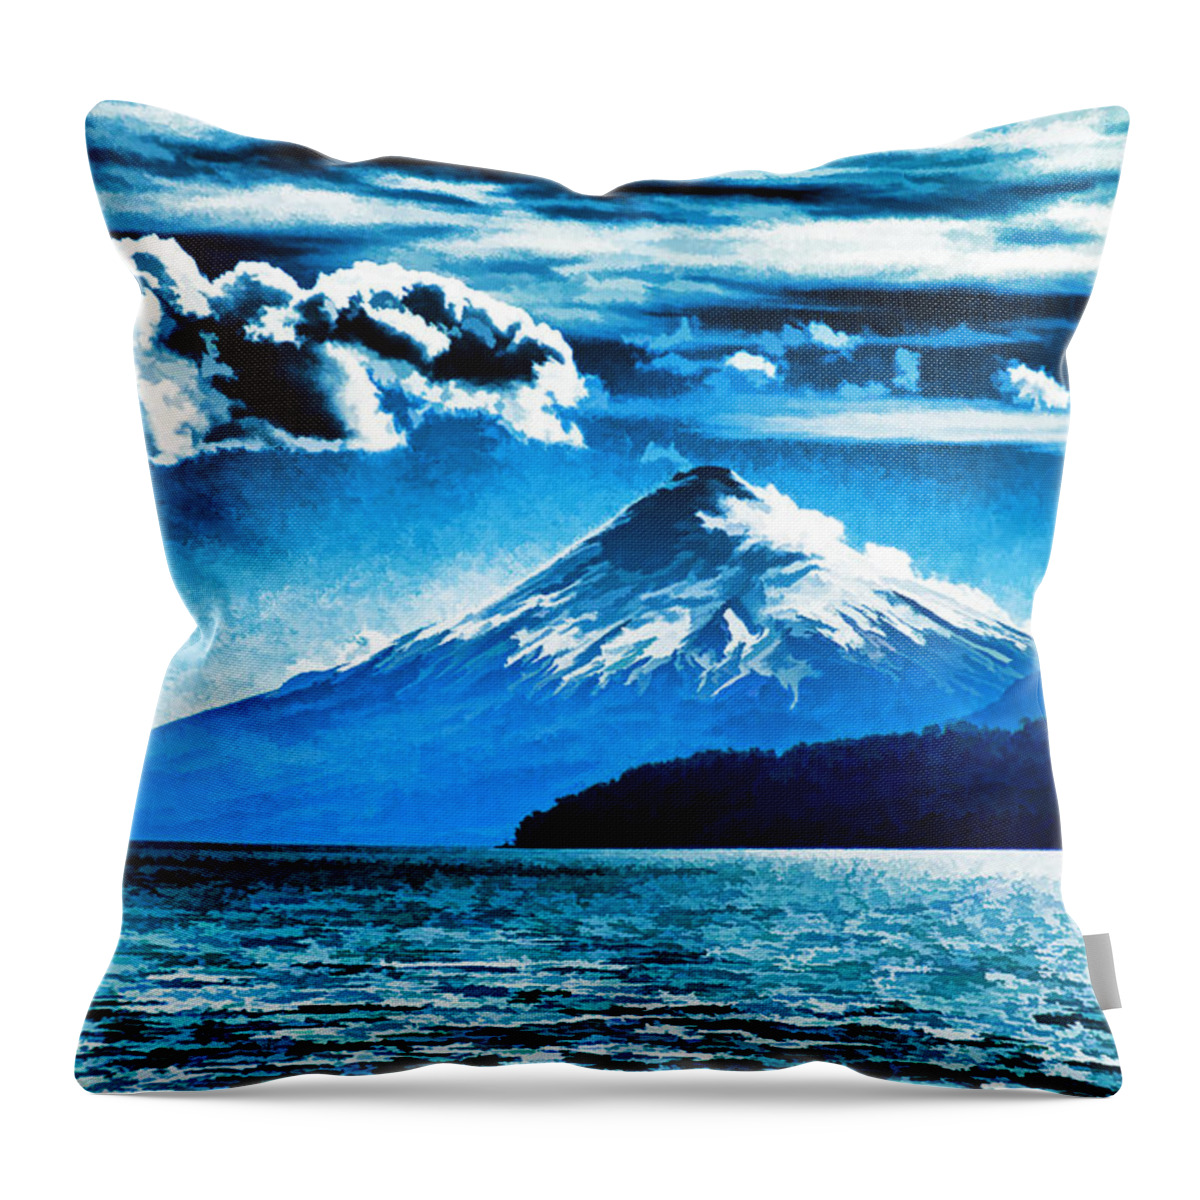 Orsono Throw Pillow featuring the photograph Chilean Volcano by Dennis Cox